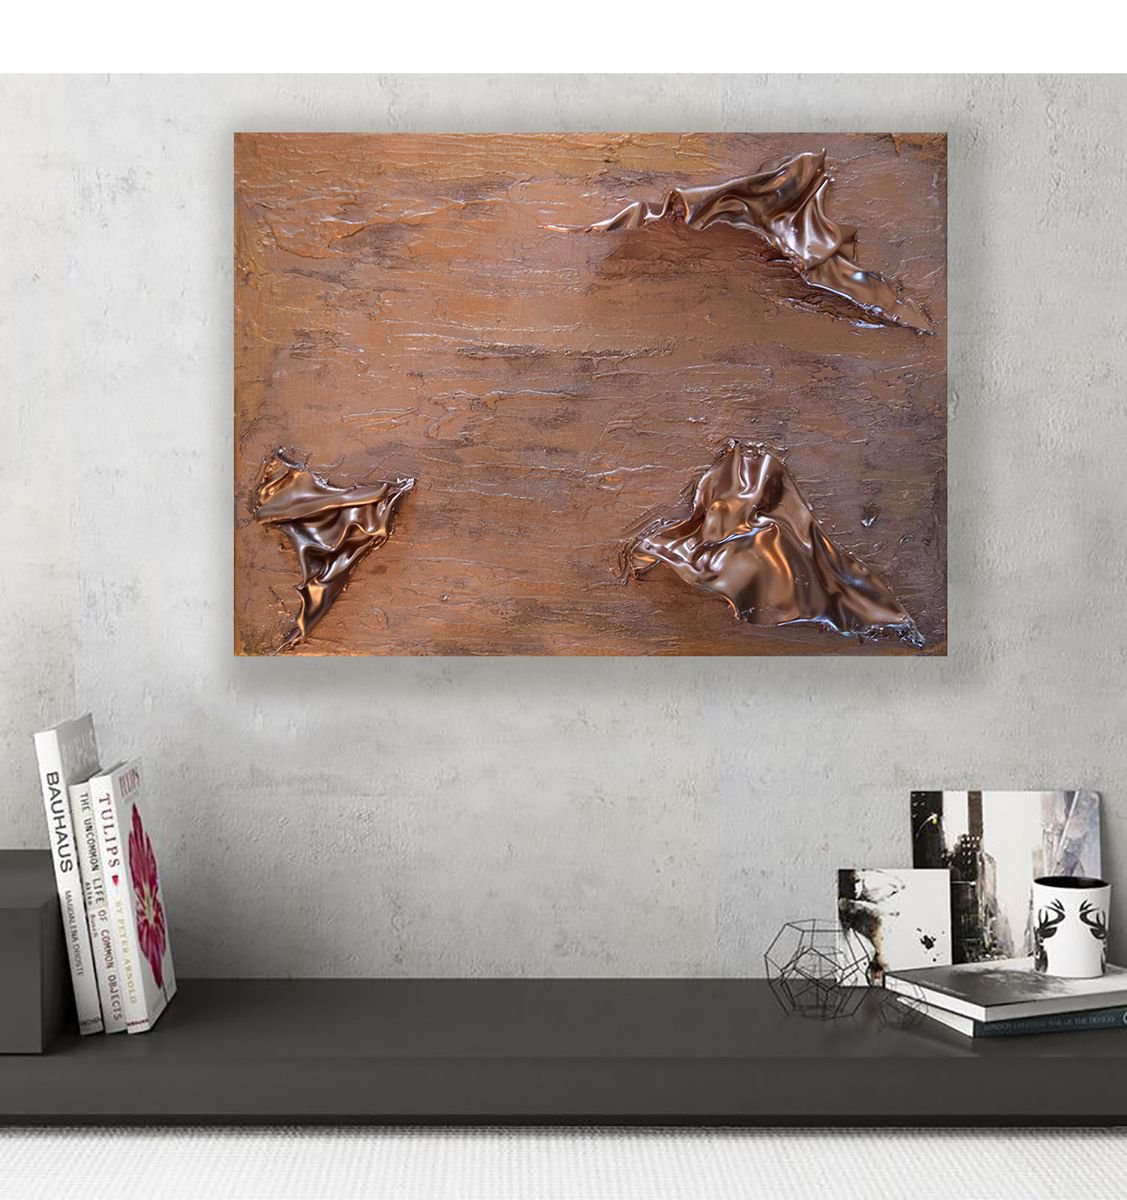 Broken Wings II Mixed Media on Canvas Series of 3D Contemporary Abstracts Office Home by Anna Sidi-Yacoub